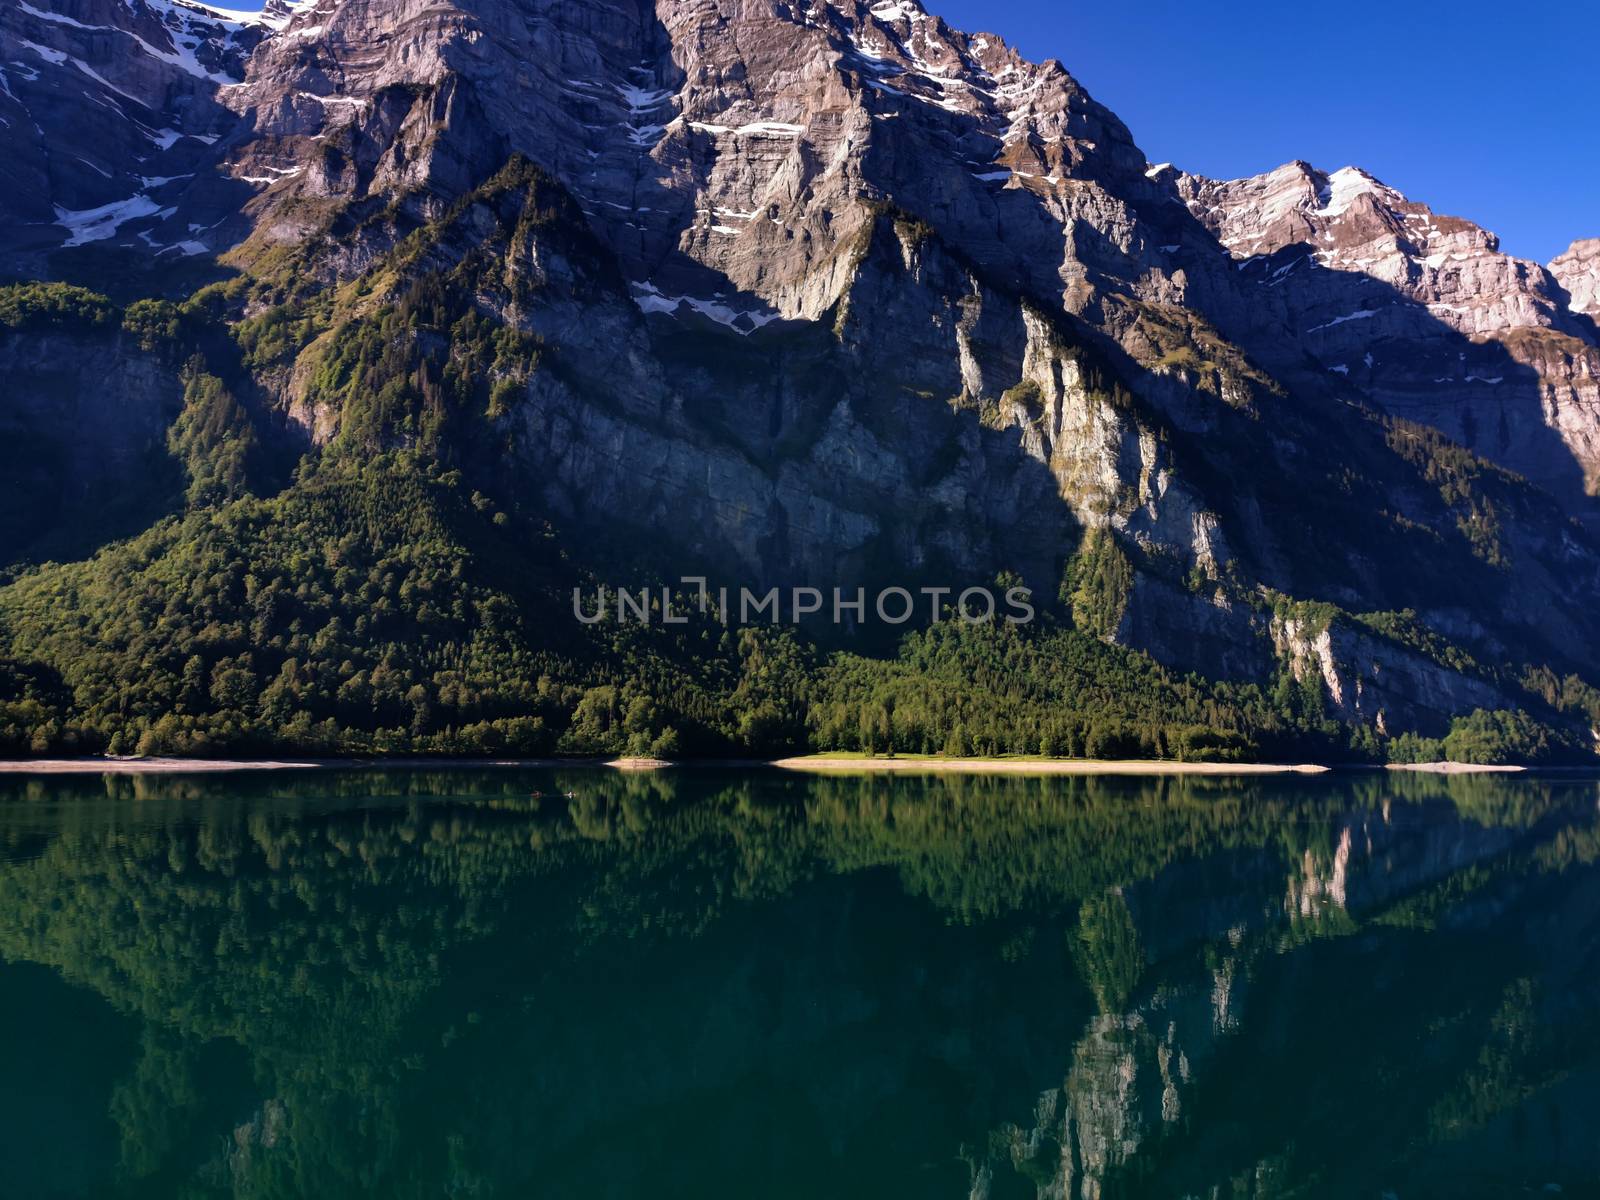 Swiss mountains and Lake. Scenic Alps and lane view. Trekking an by PeterHofstetter